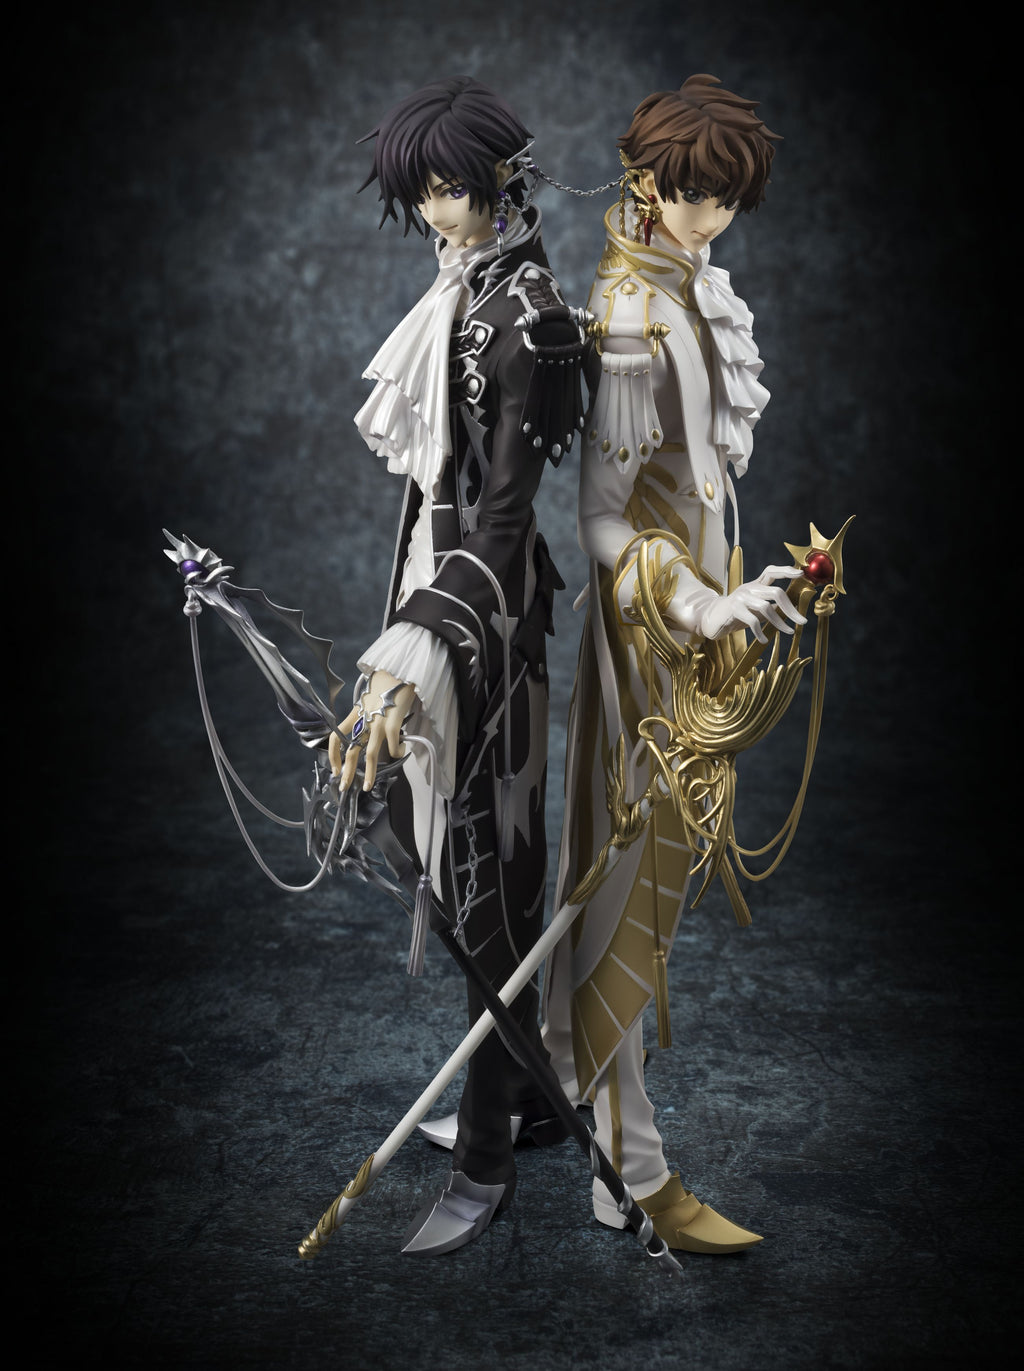 G E M Series Code Geass Lelouch Of The Rebellion R2 Clamp Works In Megahobby